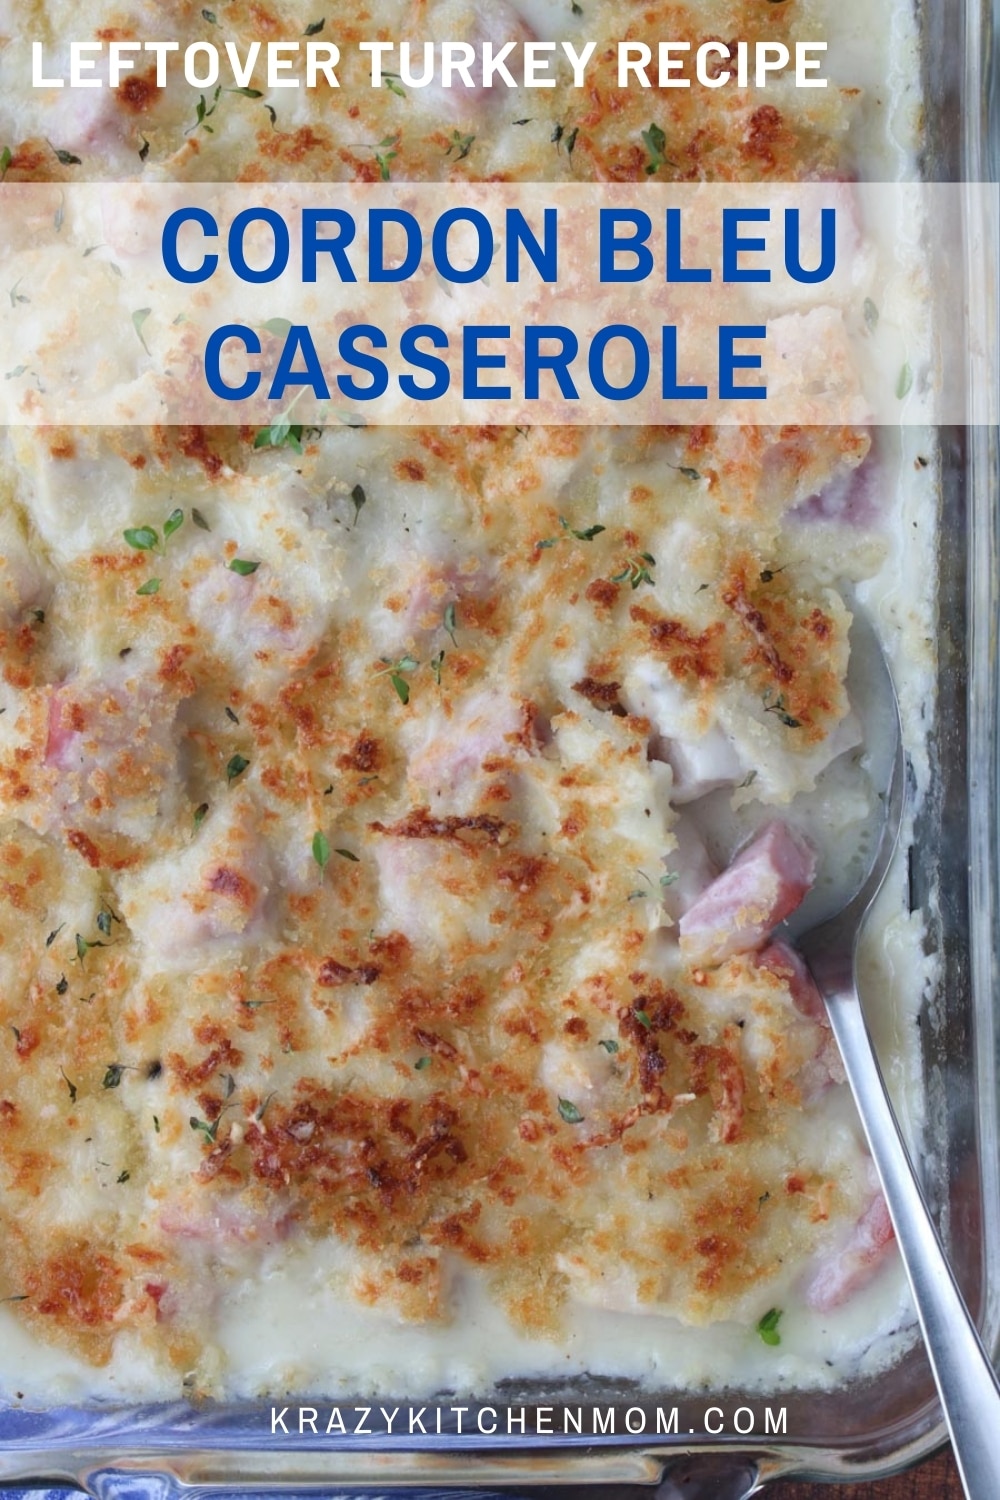 Not sure what to do with leftover turkey or ham after the holidays? Make this creamy cheesy twist on classic Cordon Bleu in a casserole. via @krazykitchenmom